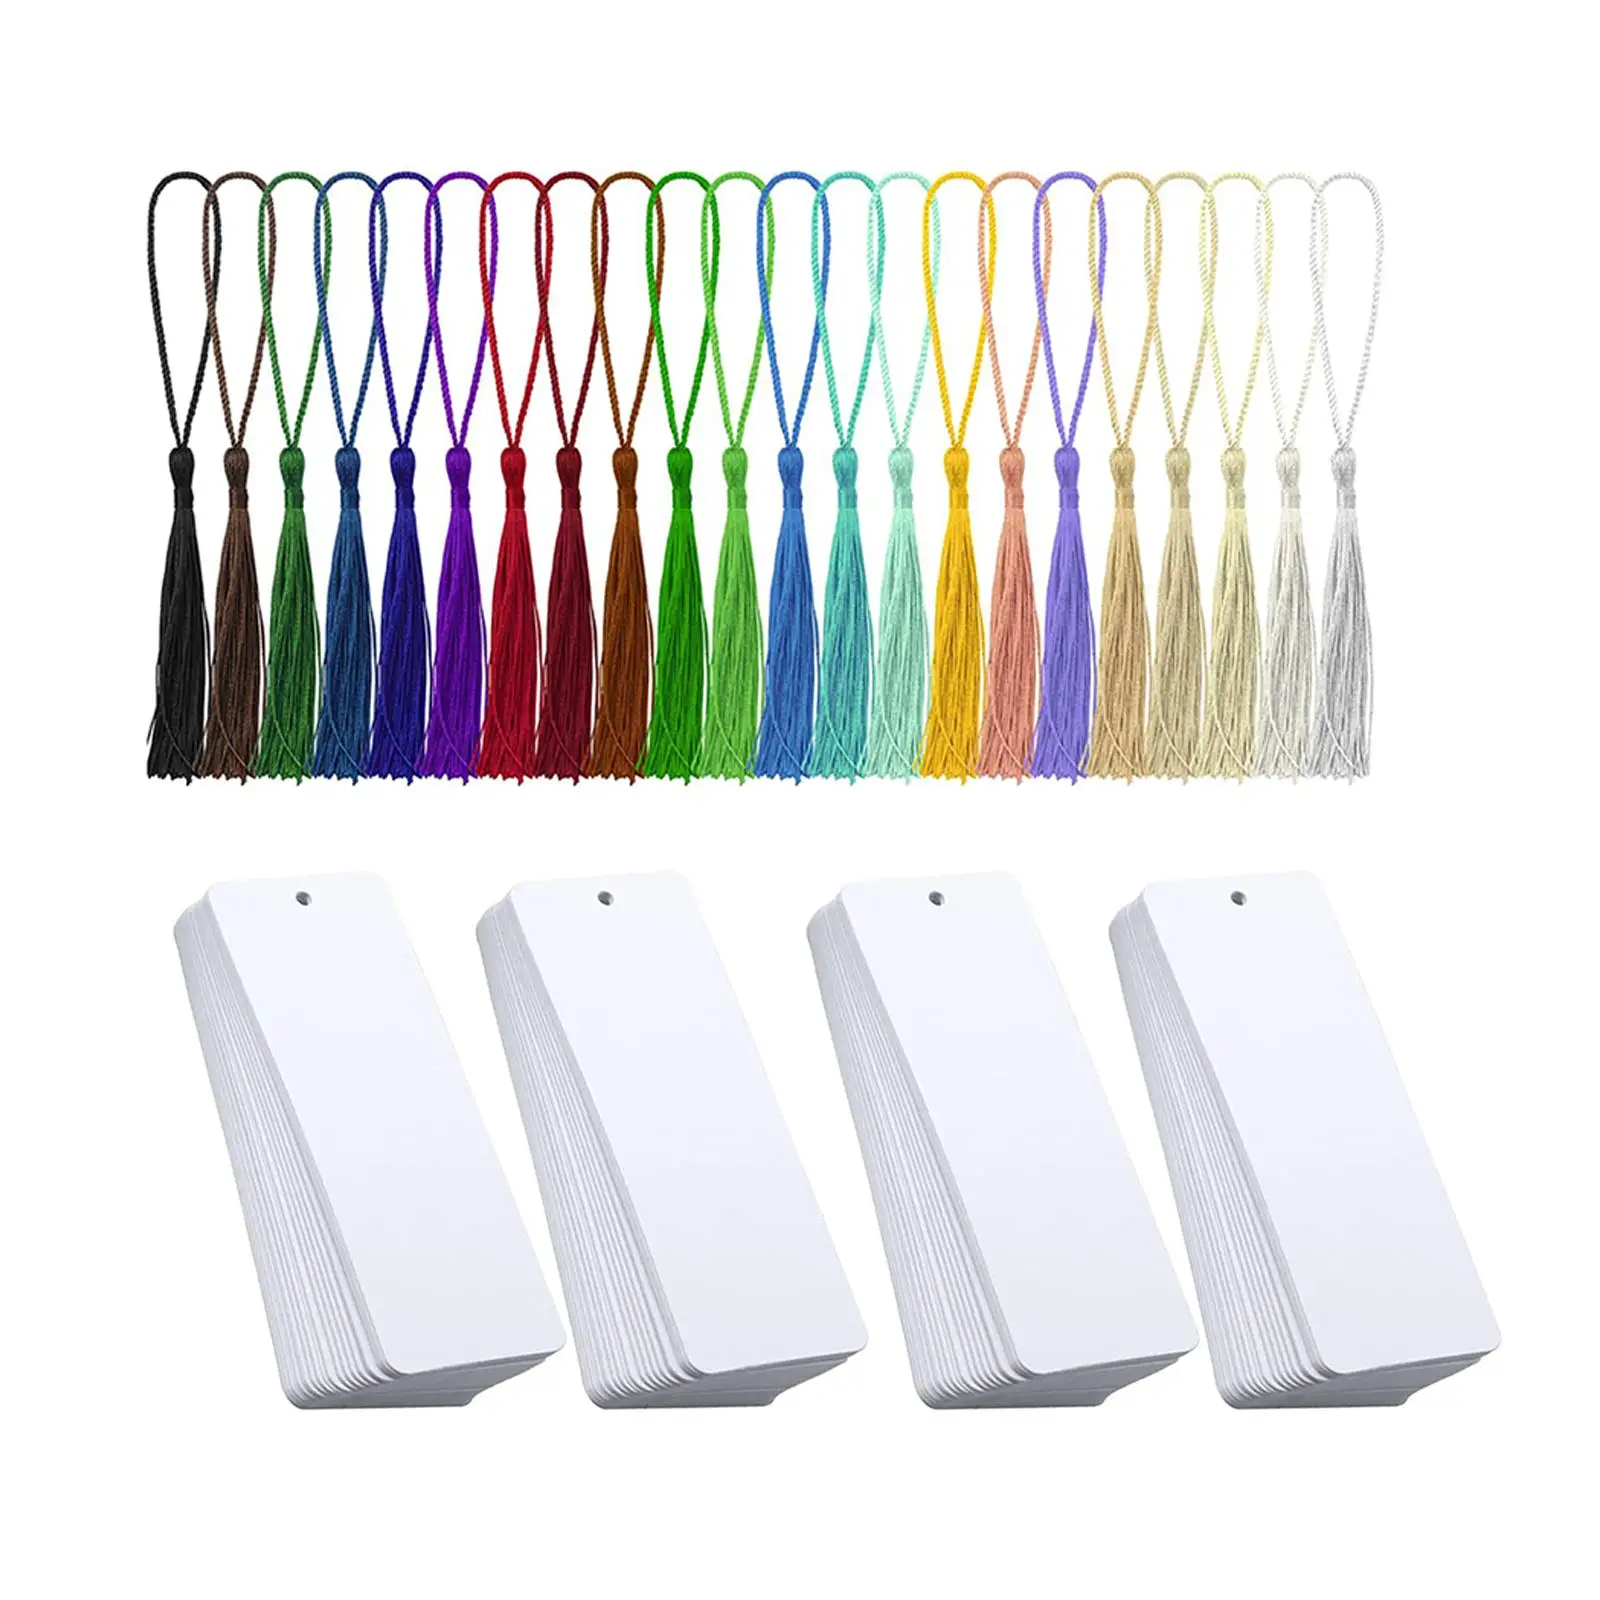 80x Blank White Bookmarks with Tassels Reading Book Markers White Bookmarks Crafting DIY Bookmarks for School Supply Present Tag